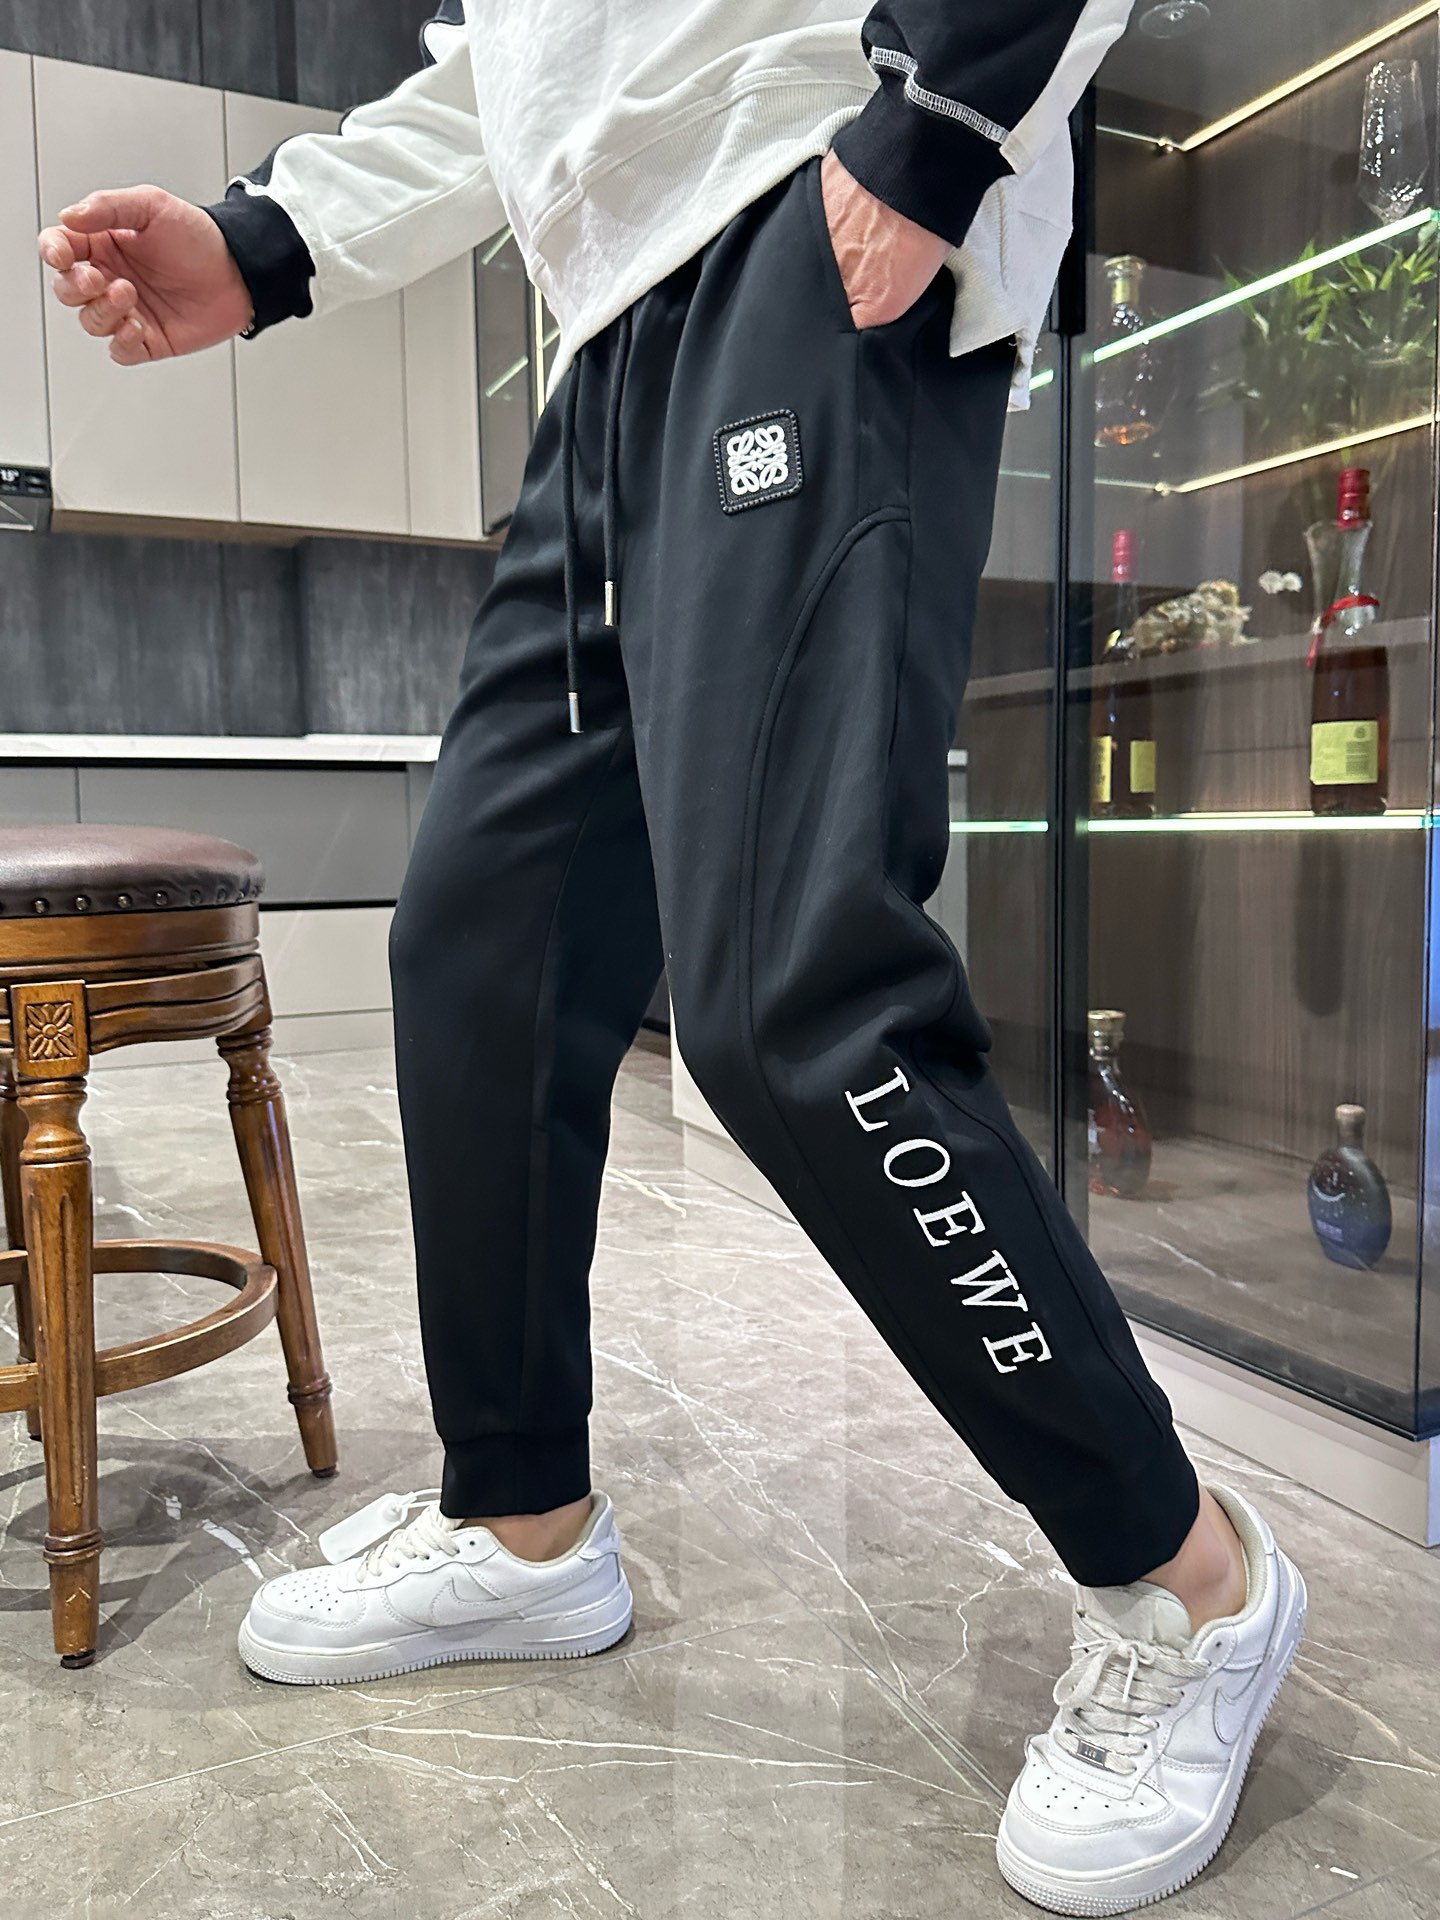 Loewe Clothing Pants & Trousers Spring/Summer Collection Casual